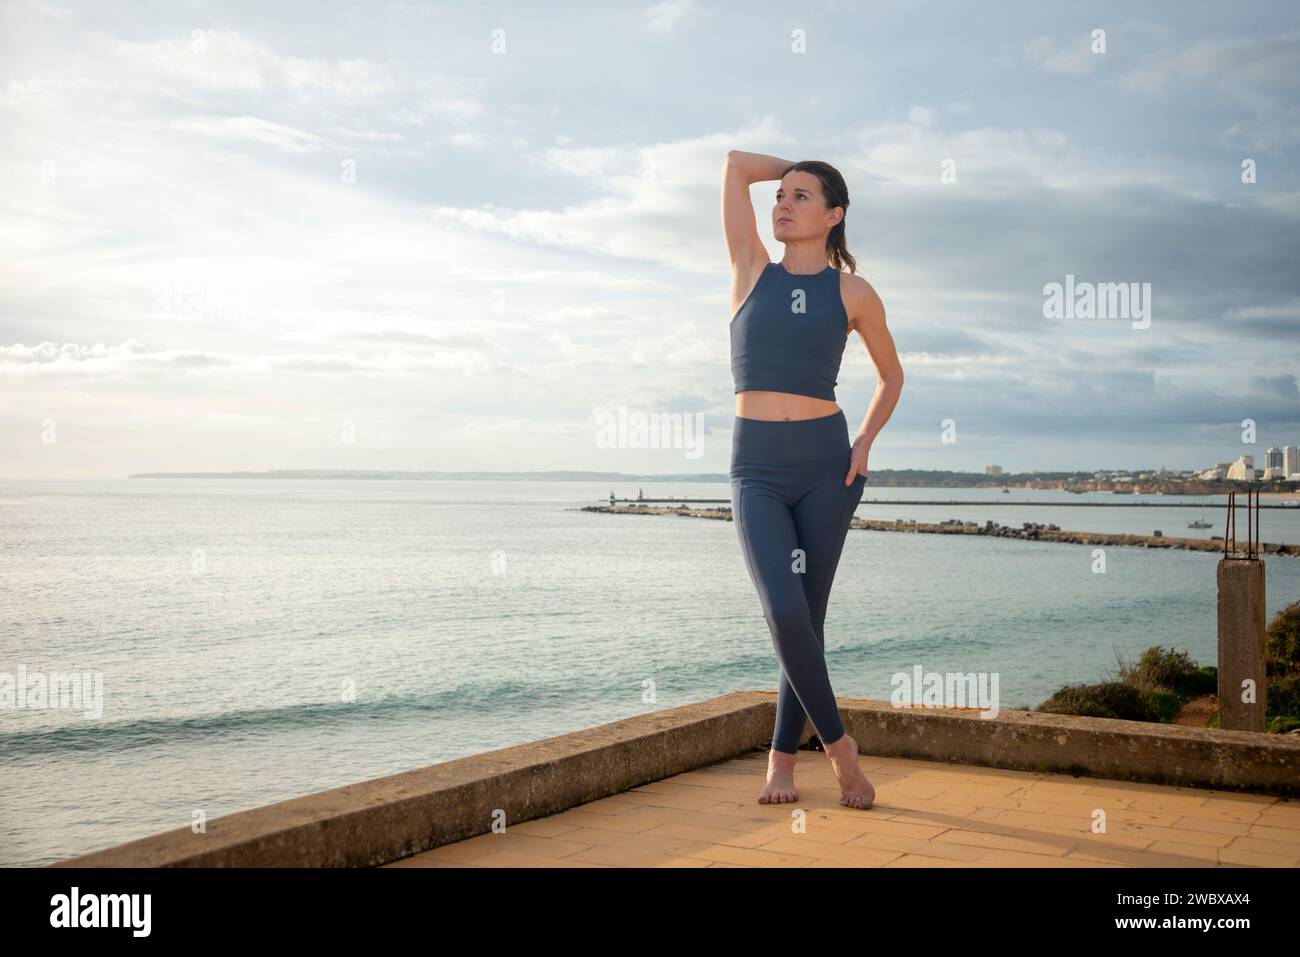 Sporty woman standing by the ocean, relaxing after workout, hand on head Stock Photo